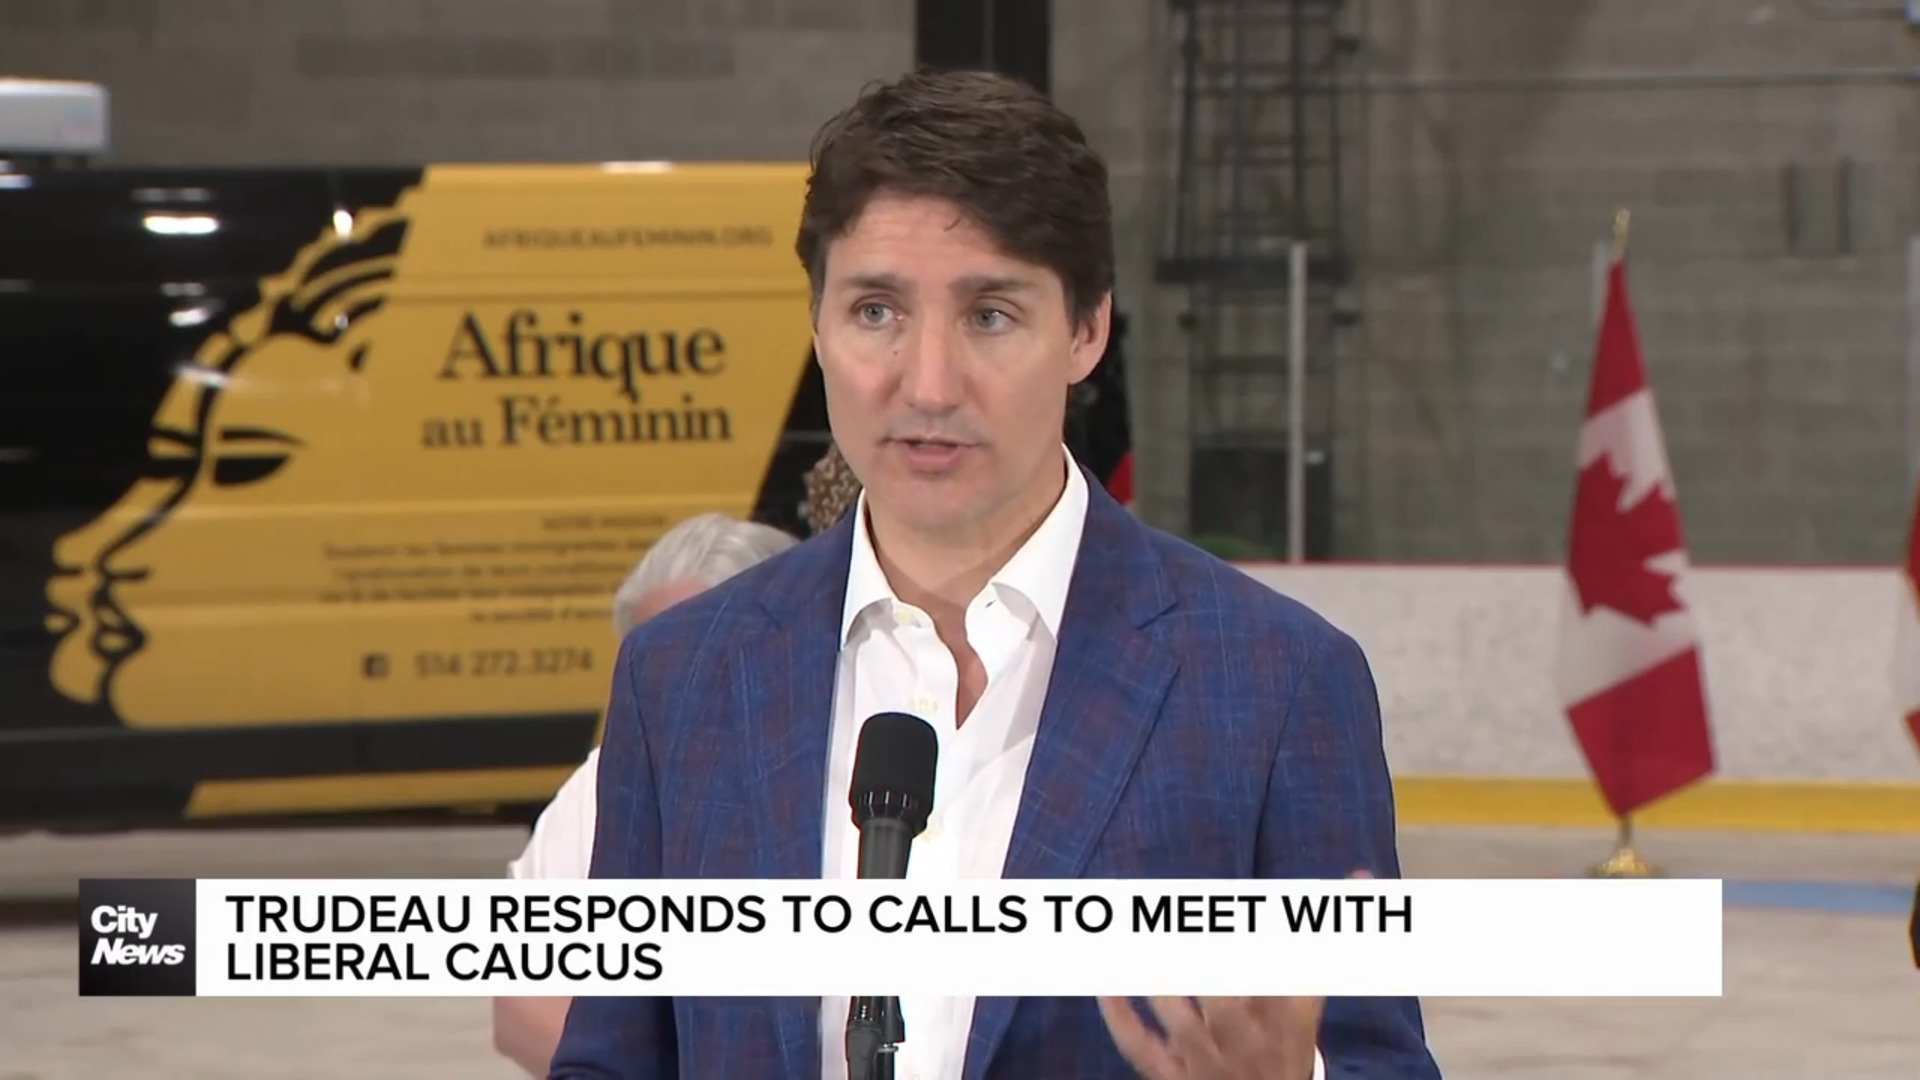 Trudeau faces calls to meet with Liberal caucus over his political future